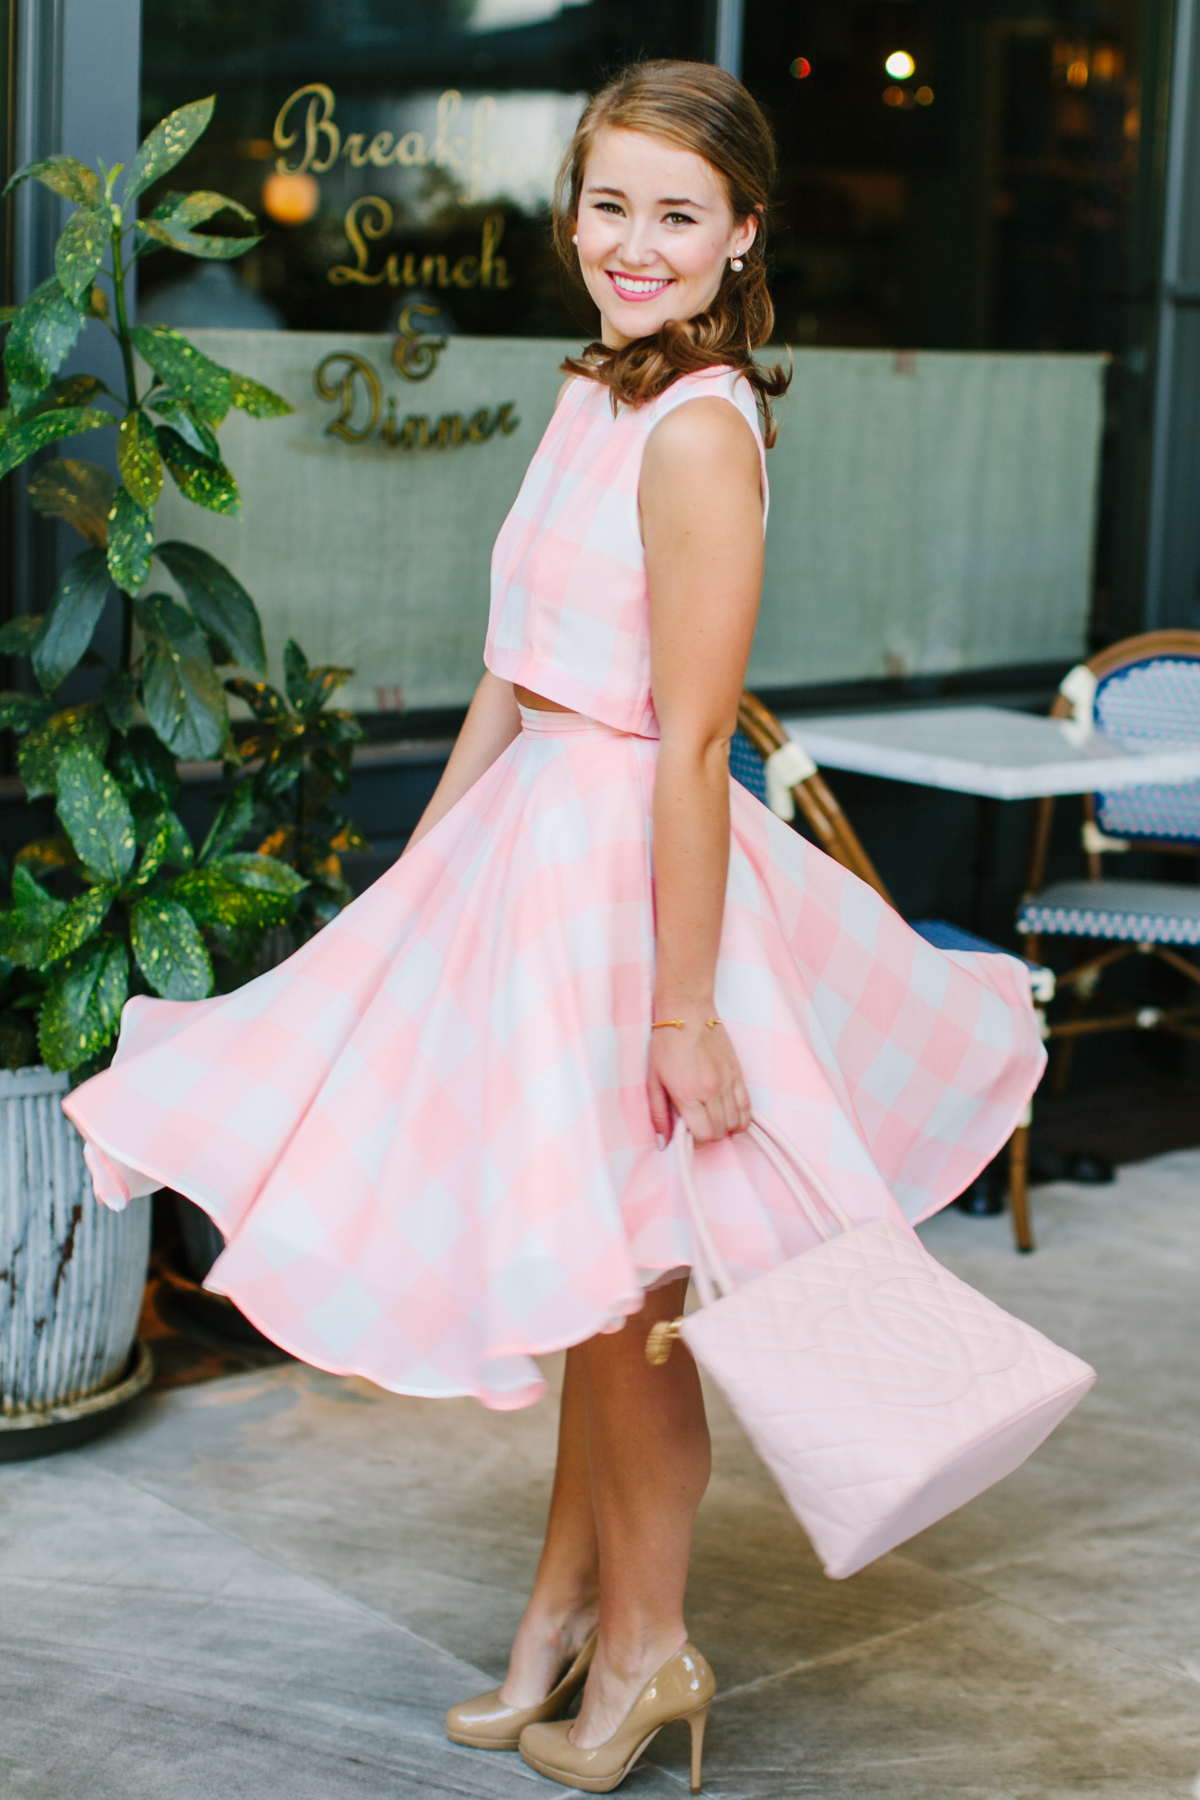 chanel and croissants | a lonestar state of southern | Bloglovin’